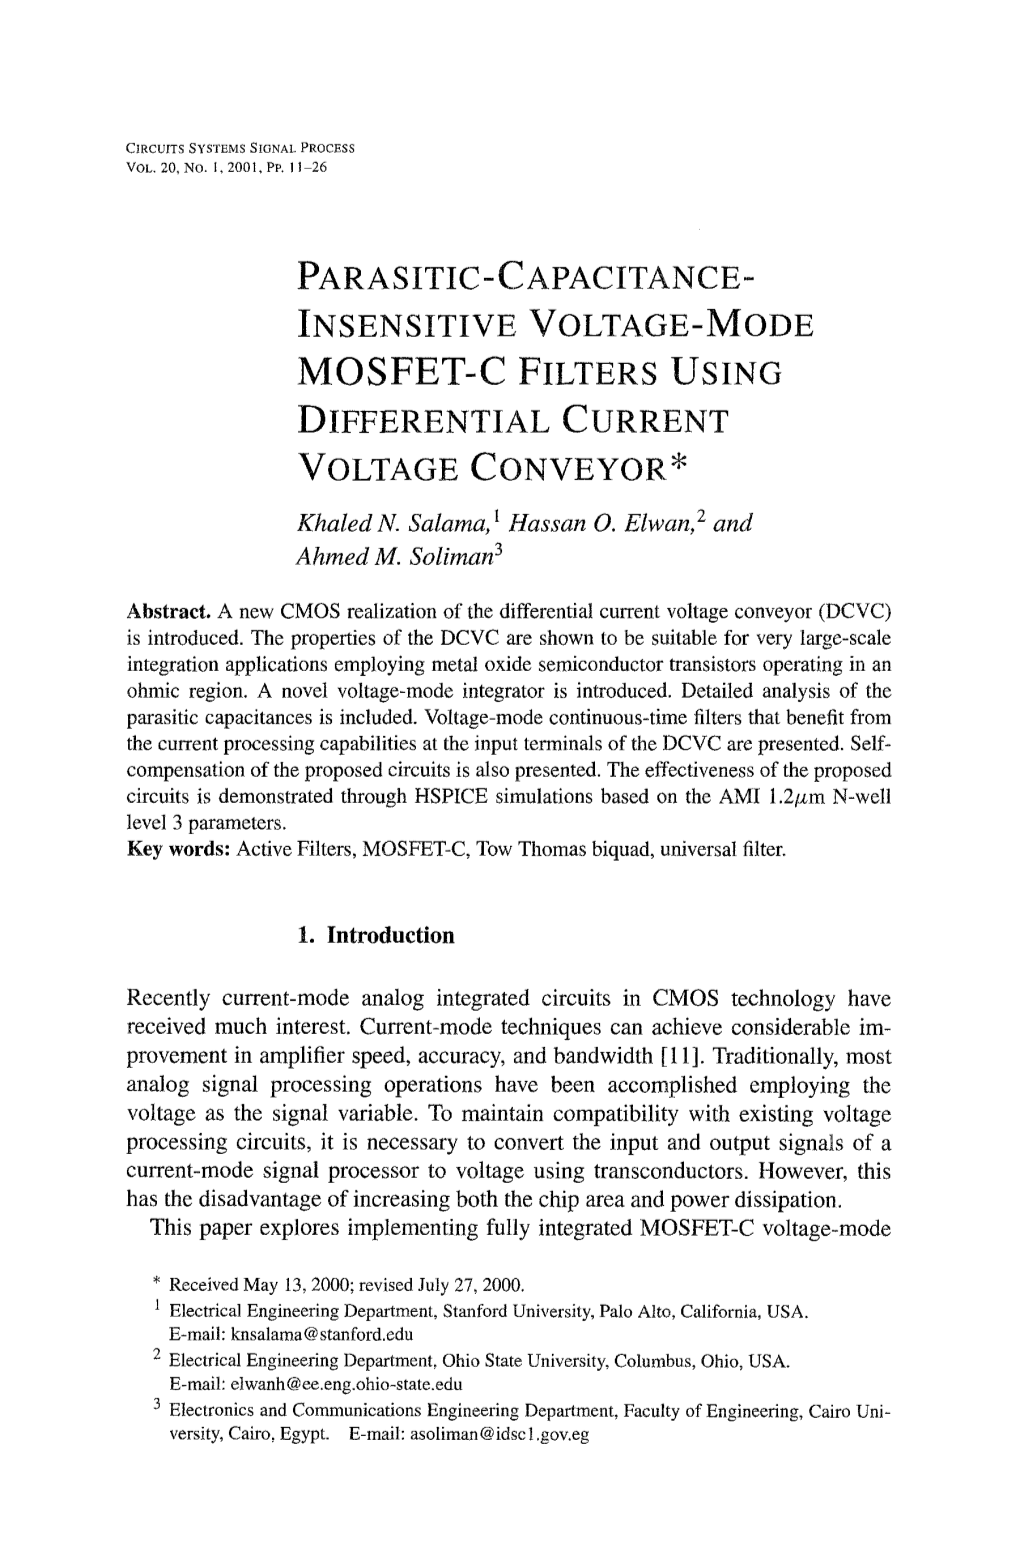 Parasitic-Capacitance- Insensitive Voltage-Mode Mosfet-C Filters Using Differential Current Voltage Conveyor*